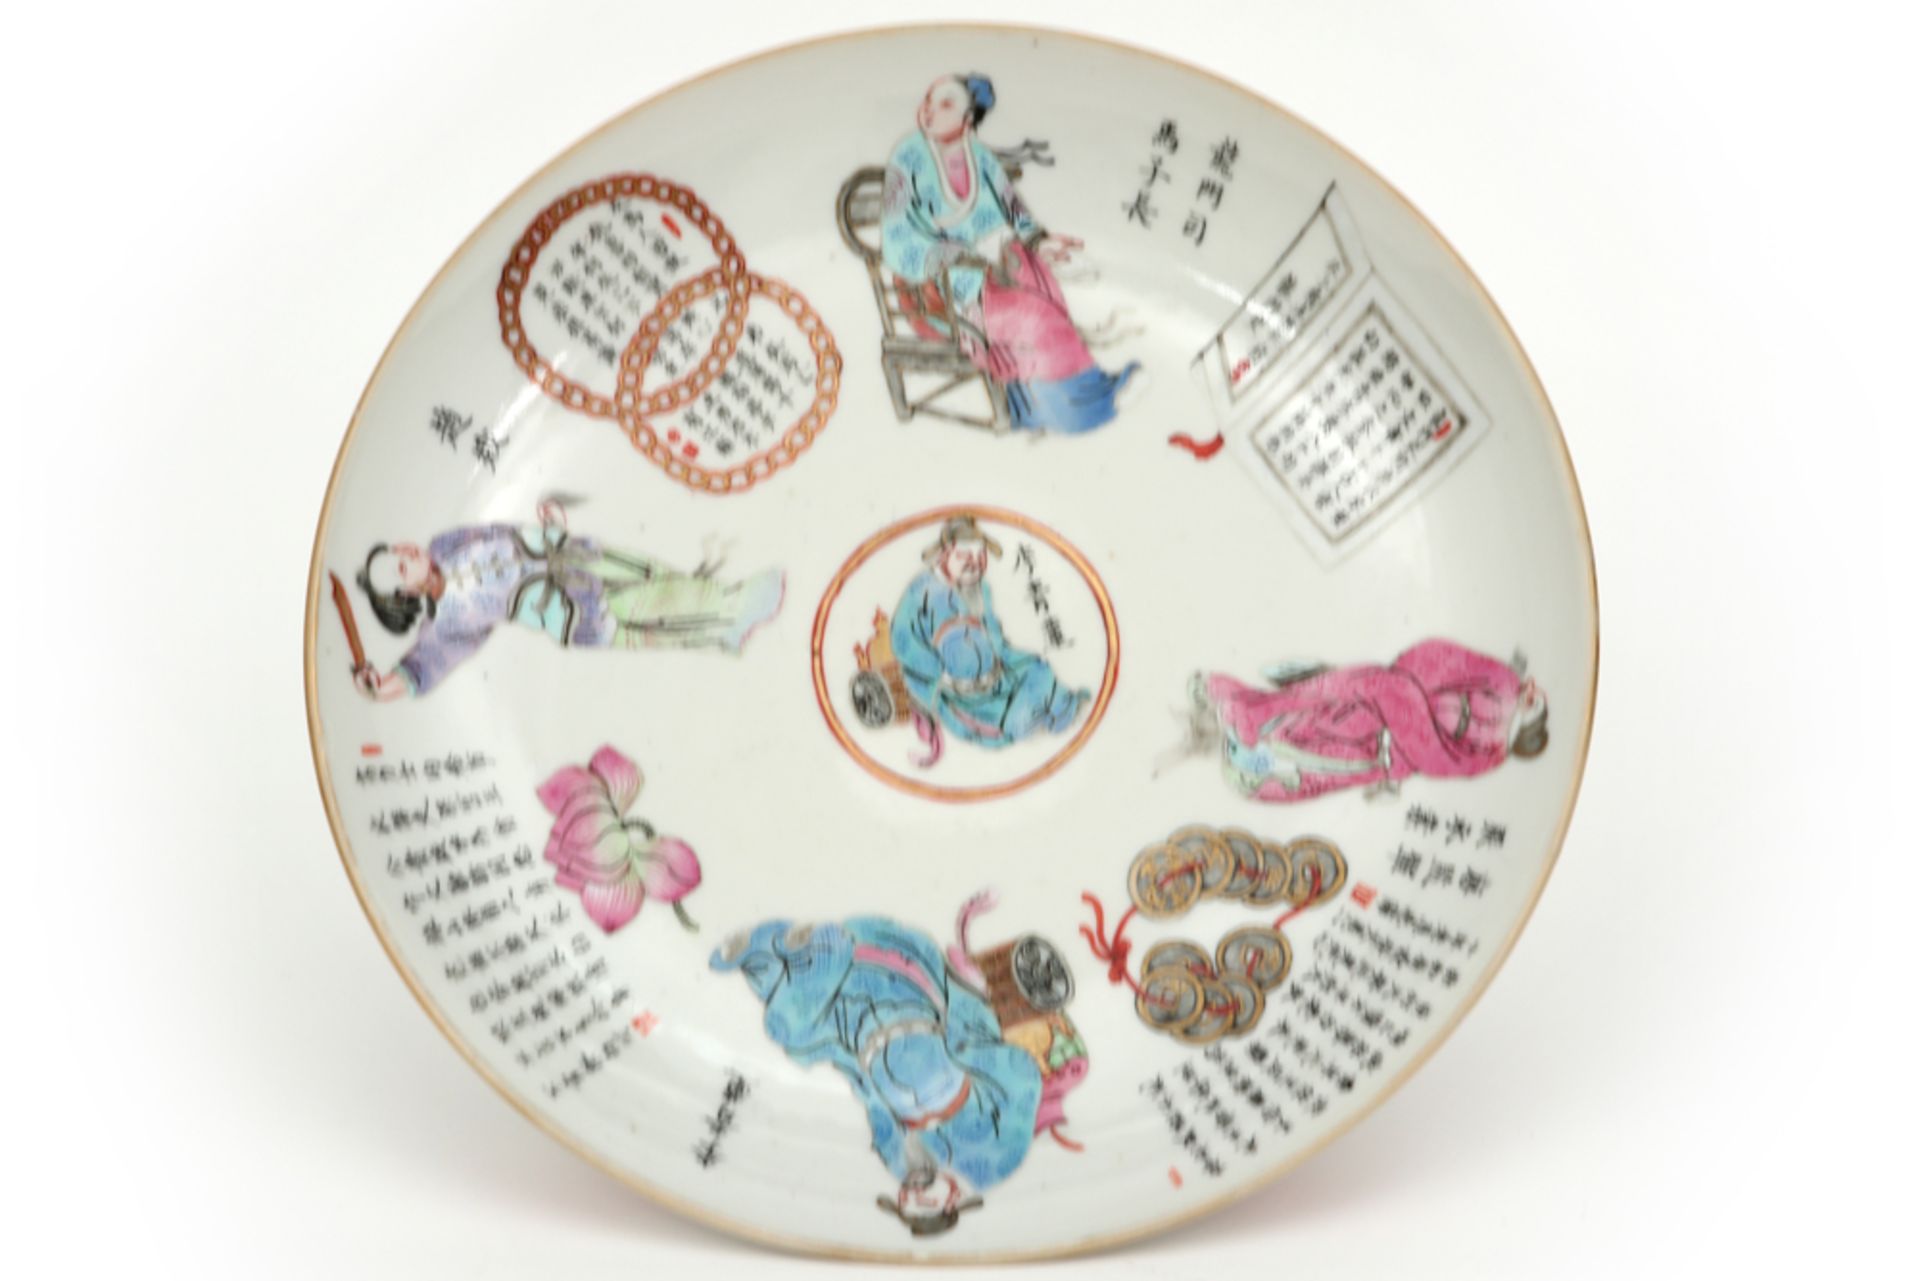 19th Cent. Chinese tazza in porcelain with a polychrome Wu Shuang Pu decor with figures and - Image 2 of 4